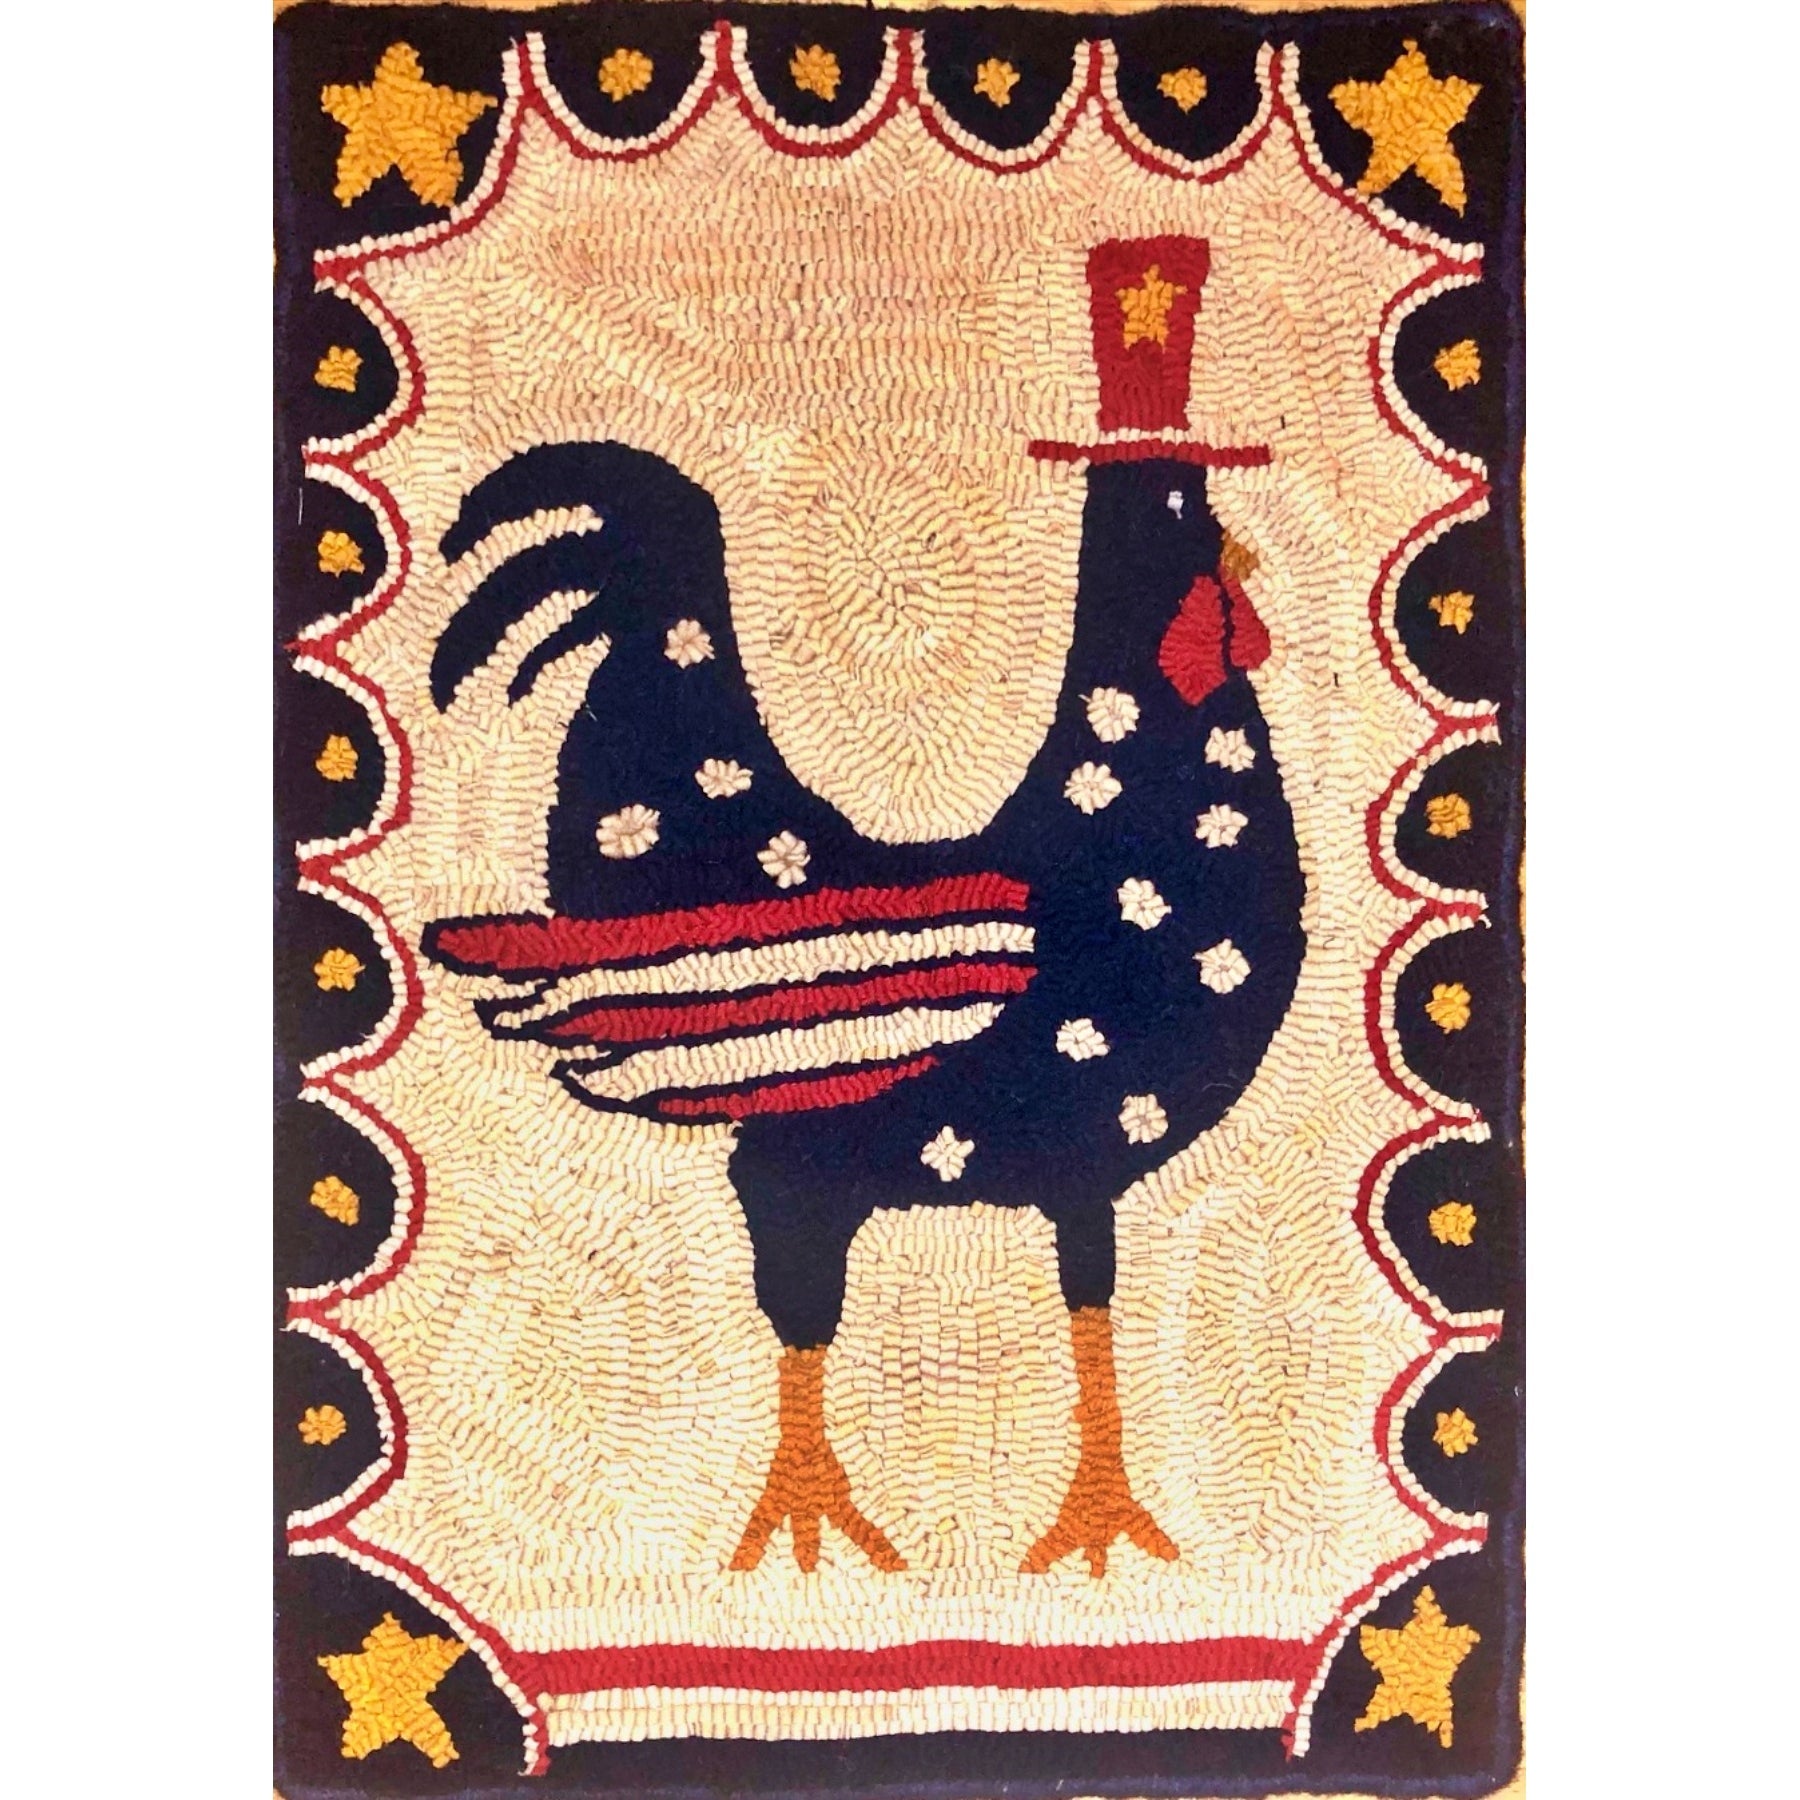 Cock-A-Doodle-Dandy, rug hooked by Dana Millet